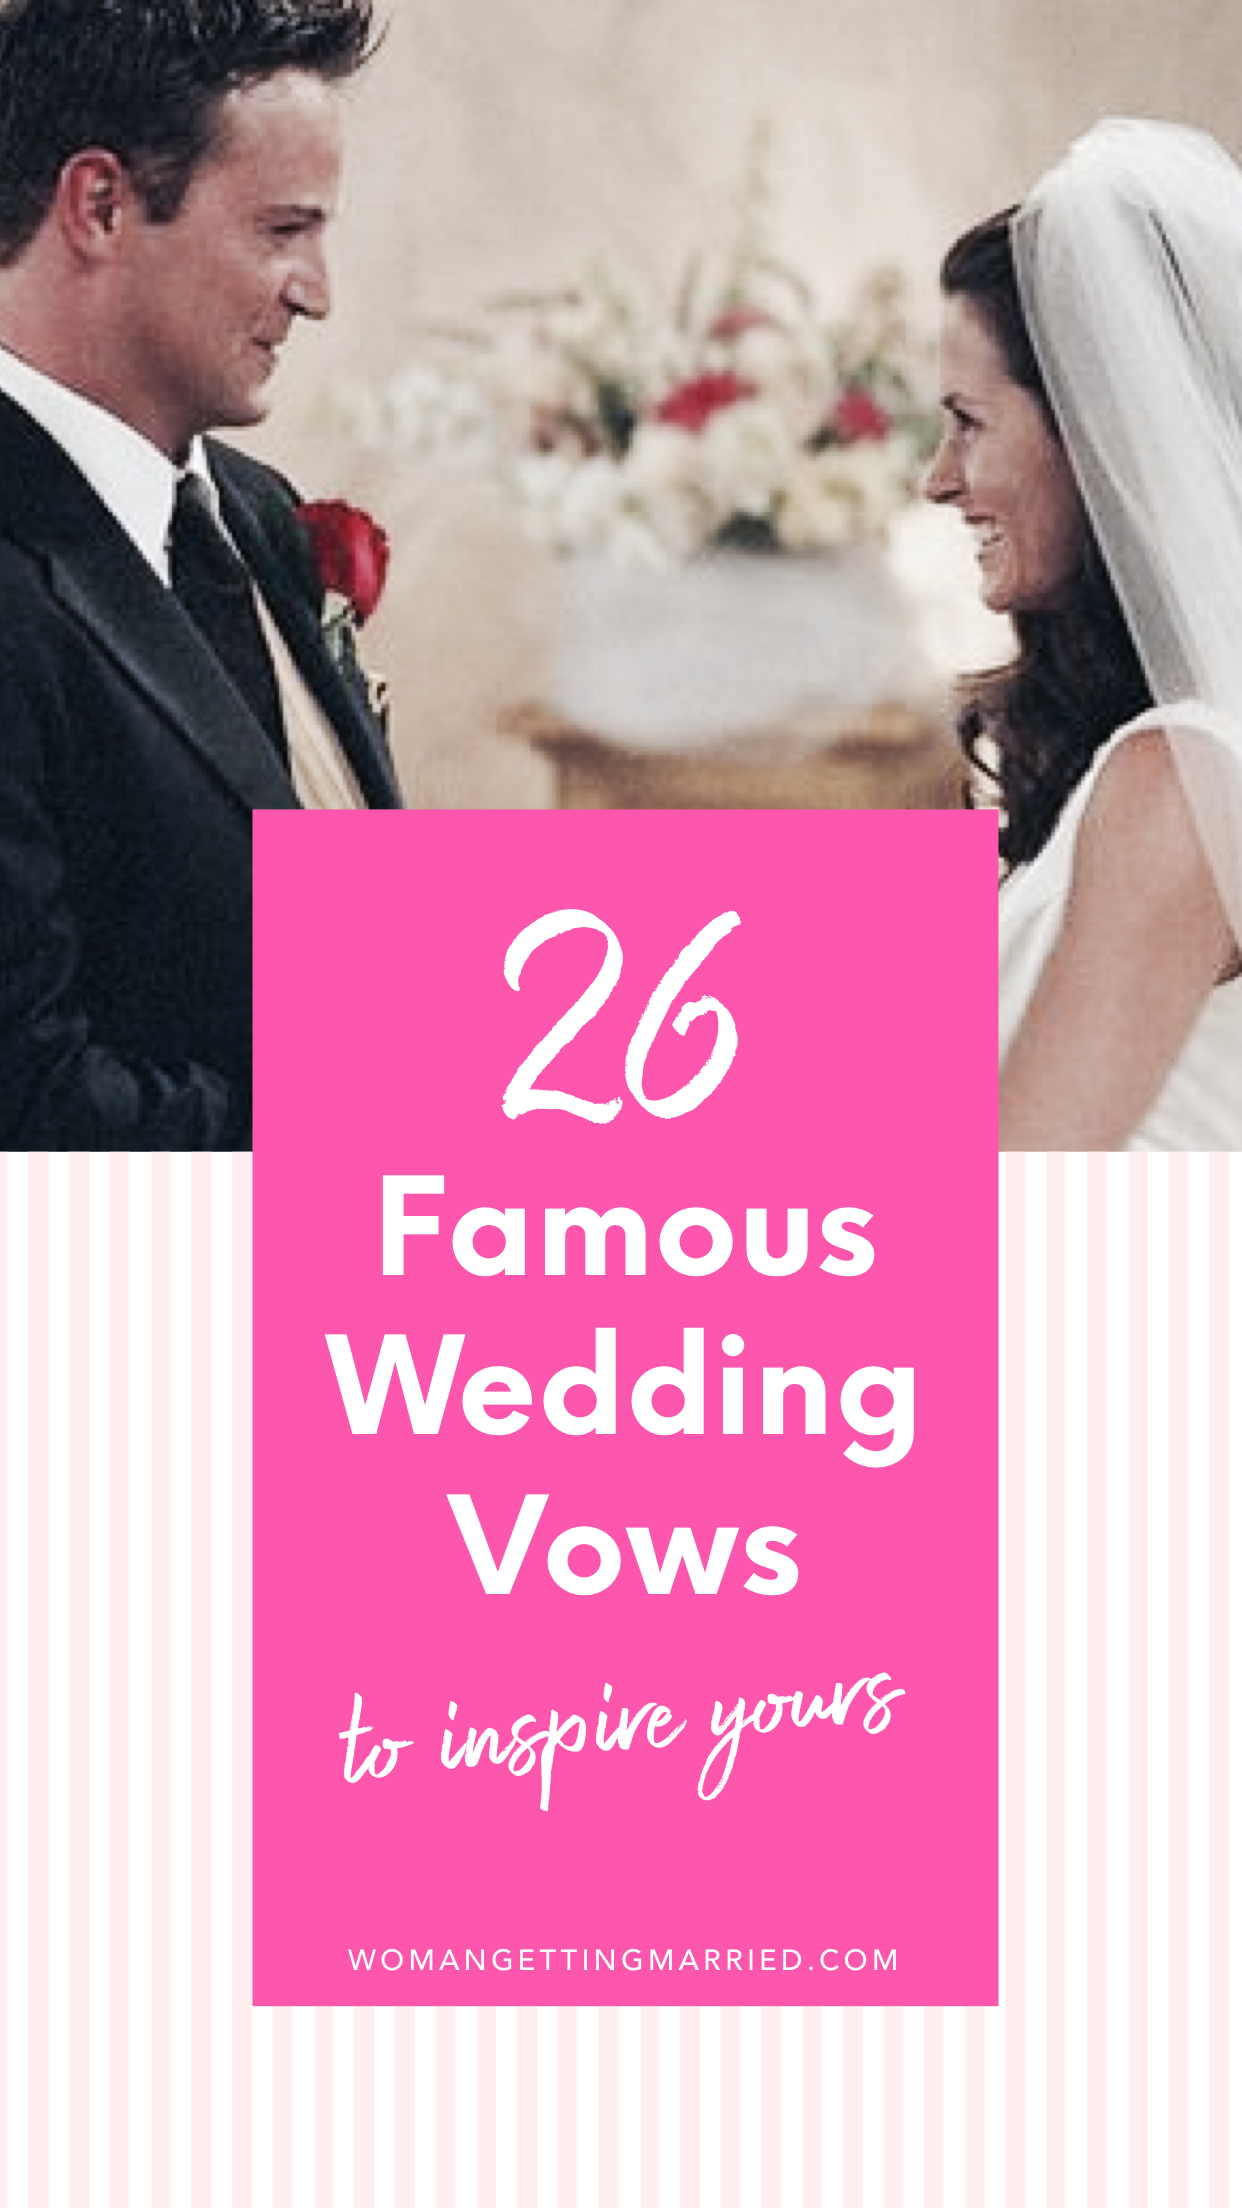 26 Famous Wedding Vows to Inspire Your Own -   16 famous wedding Vows
 ideas